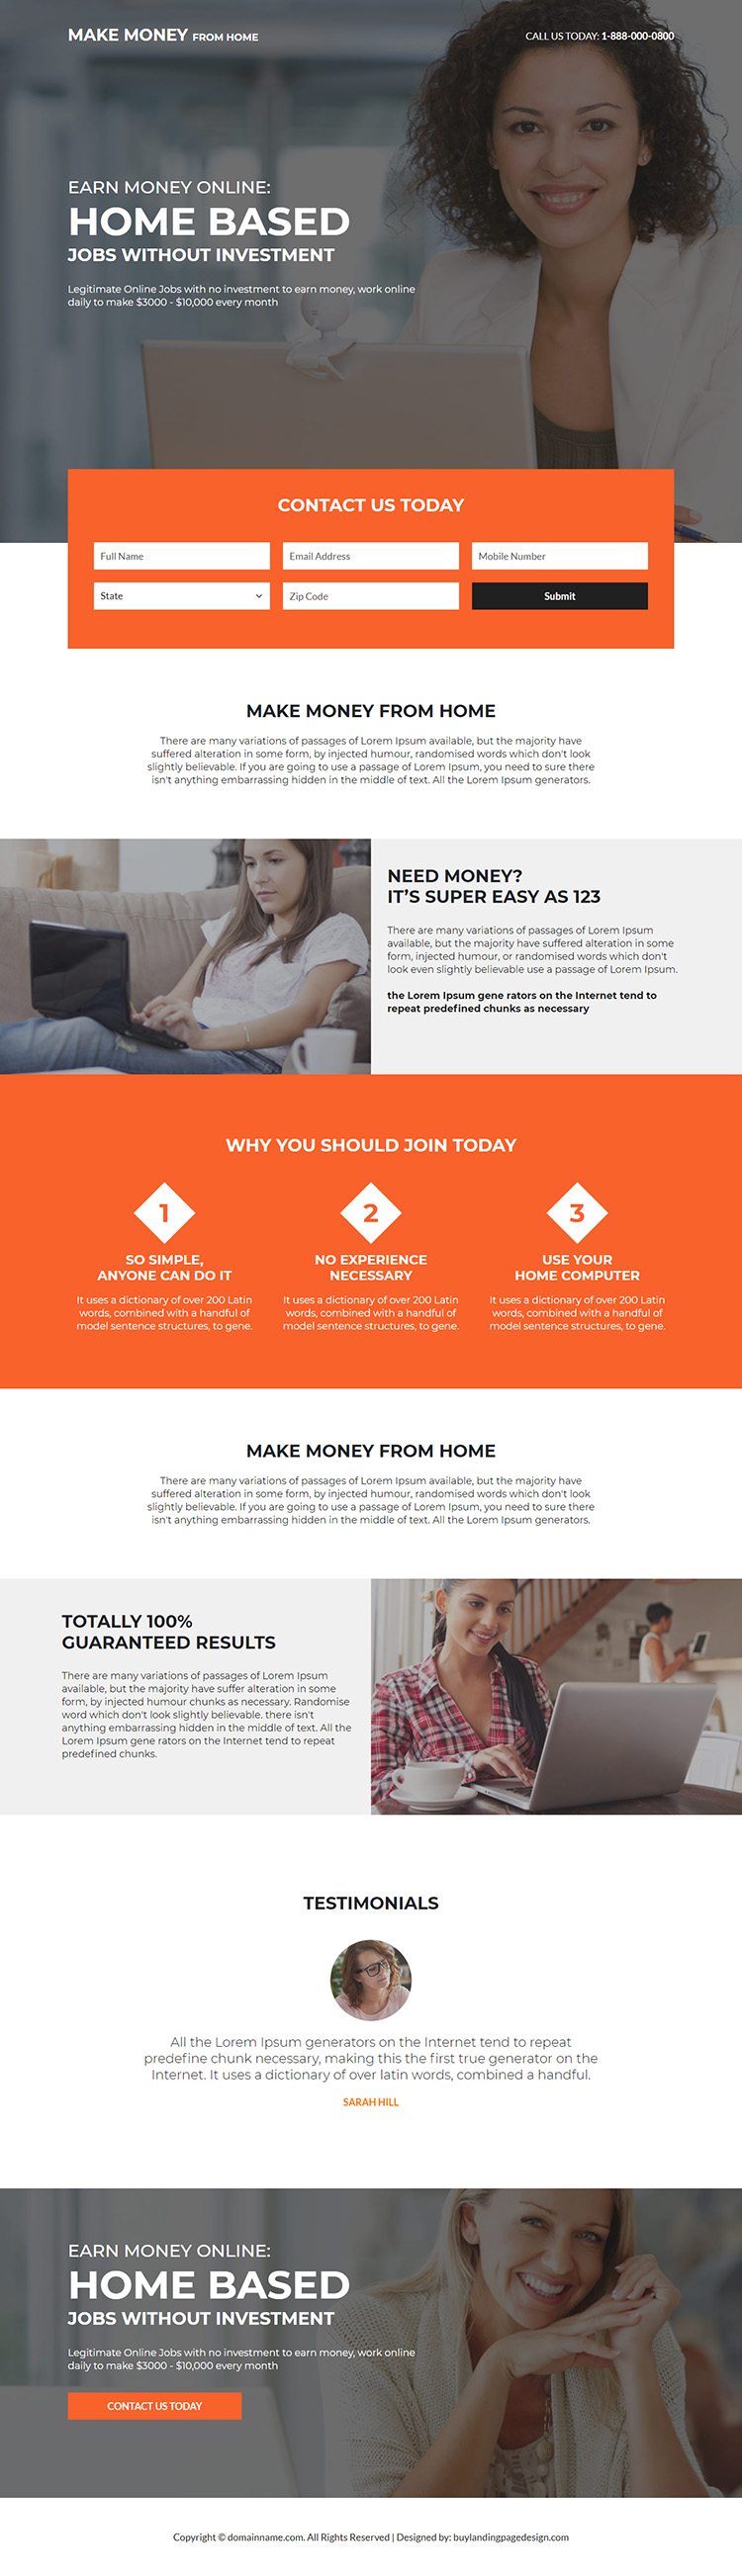 work from home without investment landing page